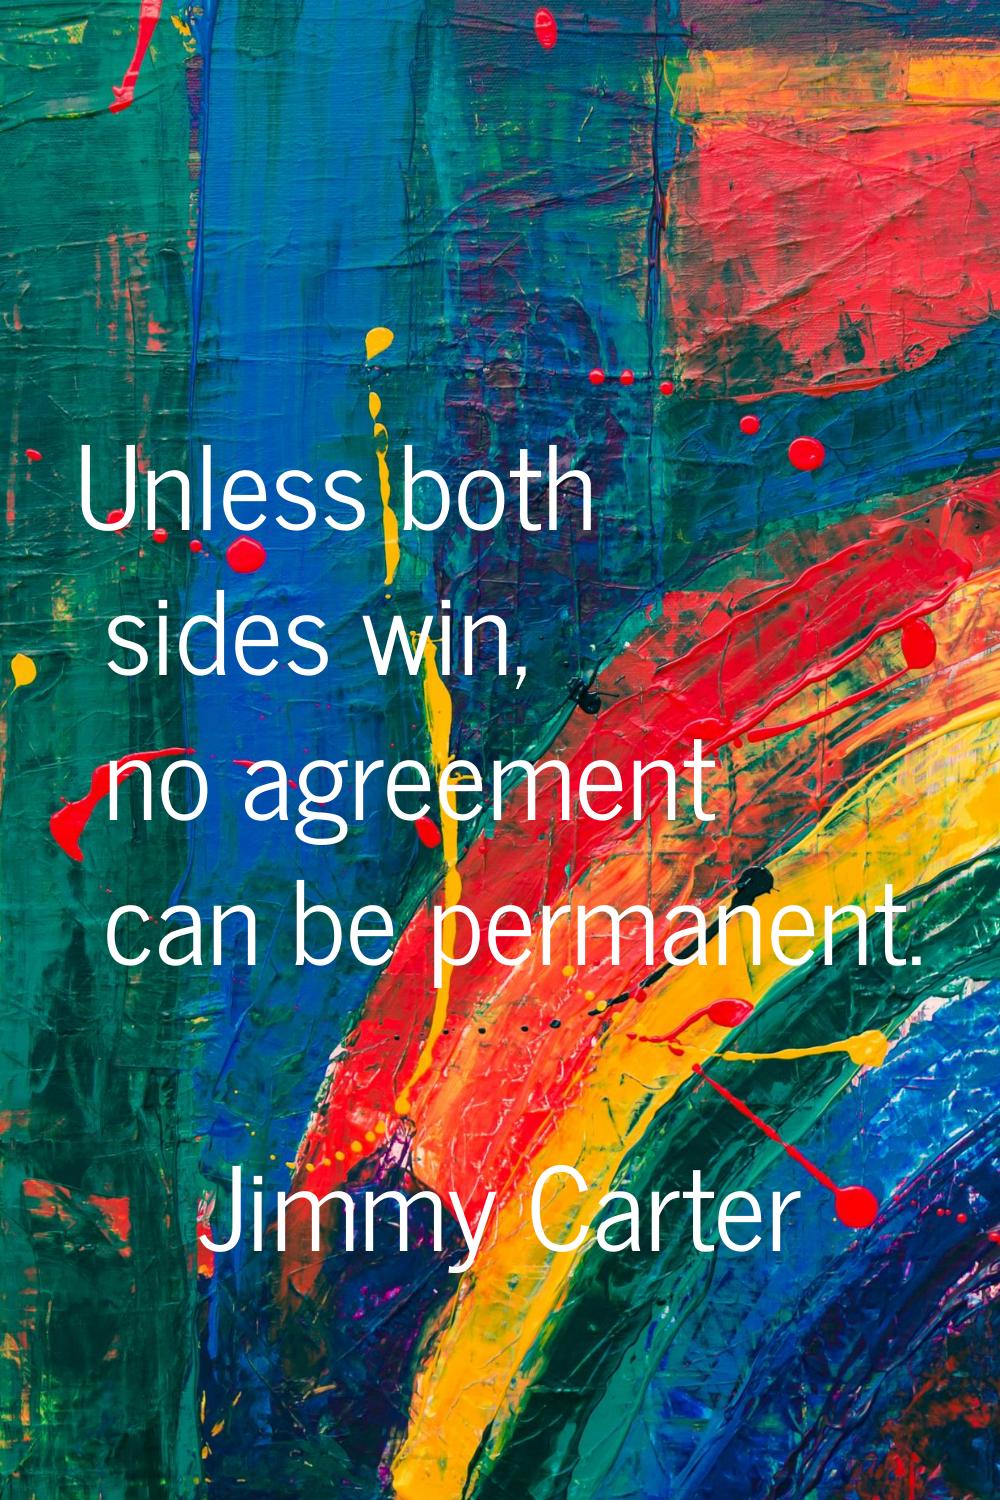 Unless both sides win, no agreement can be permanent.